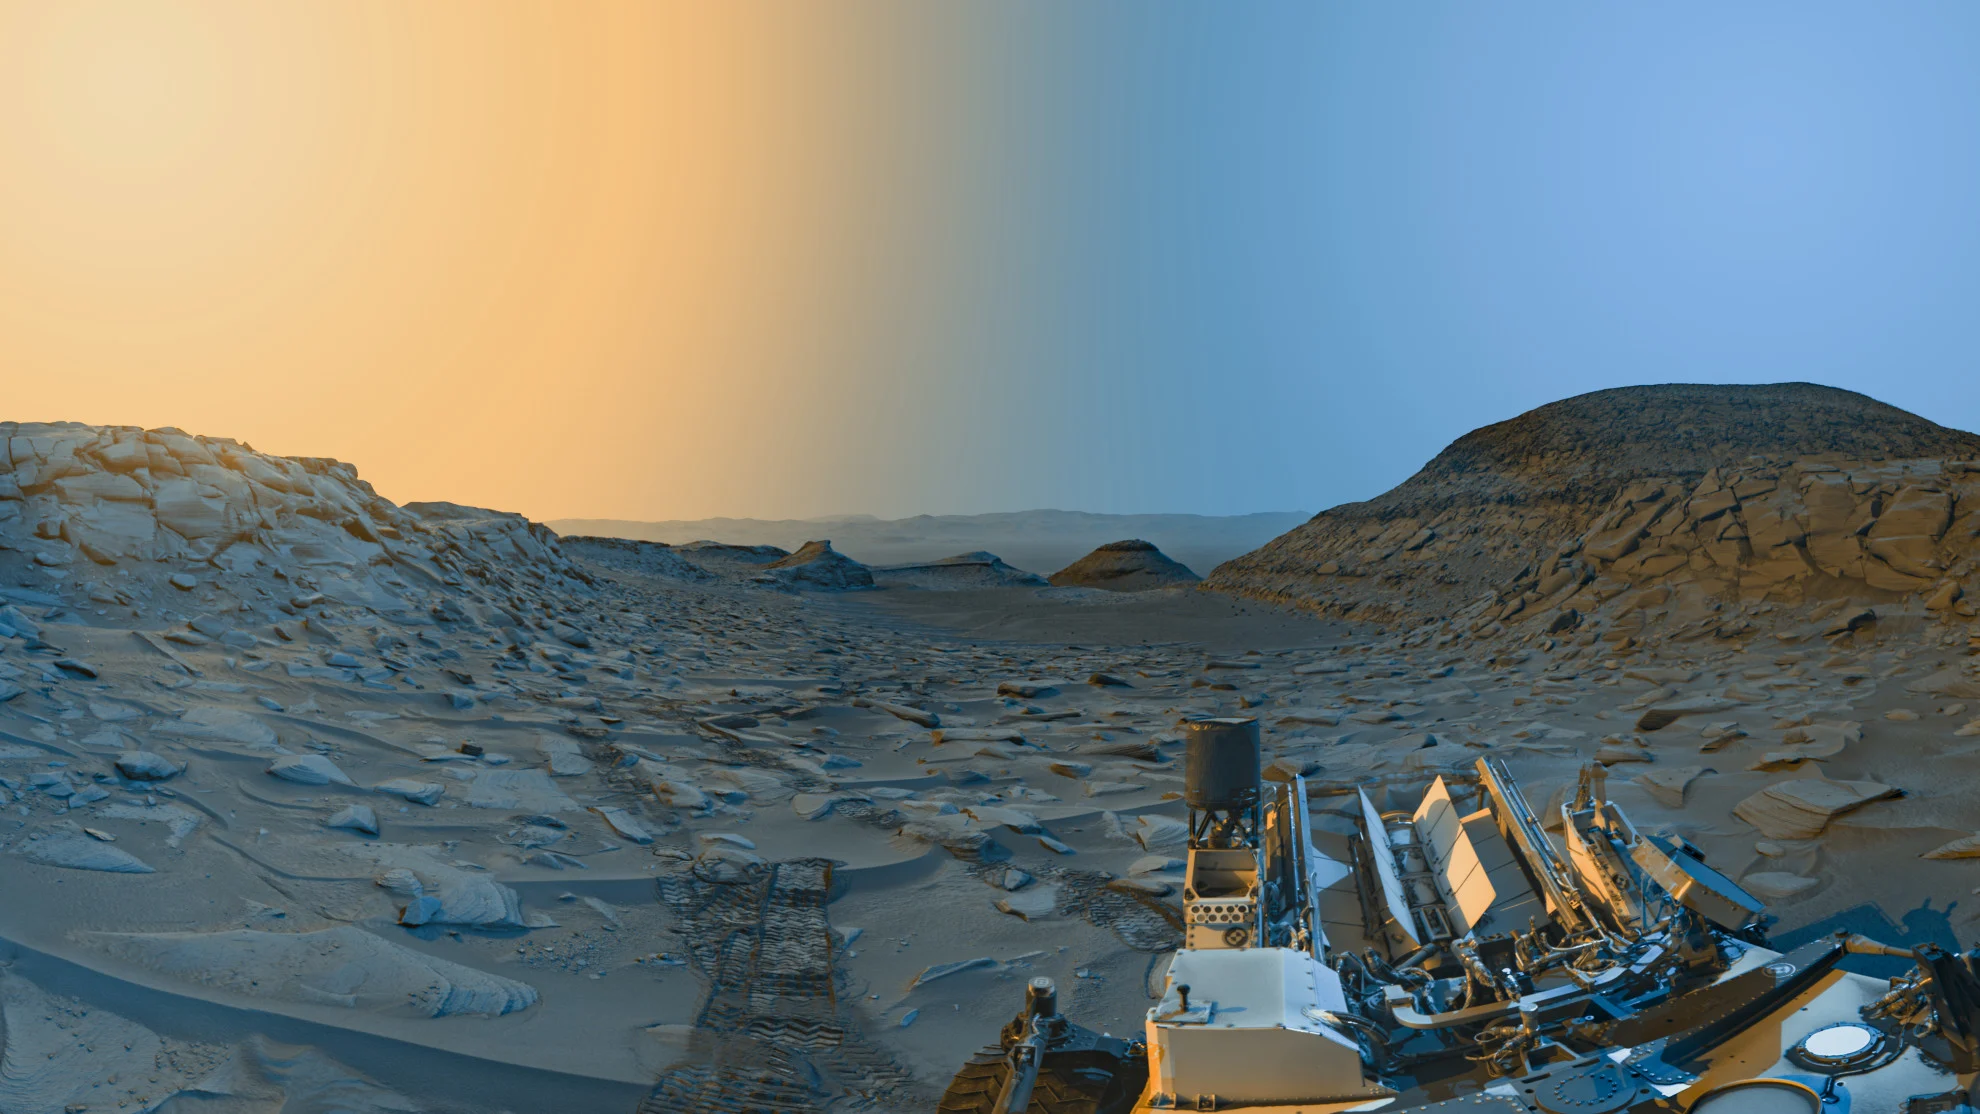 Curiosity rover sends back a marvelous 'postcard' view of Mars